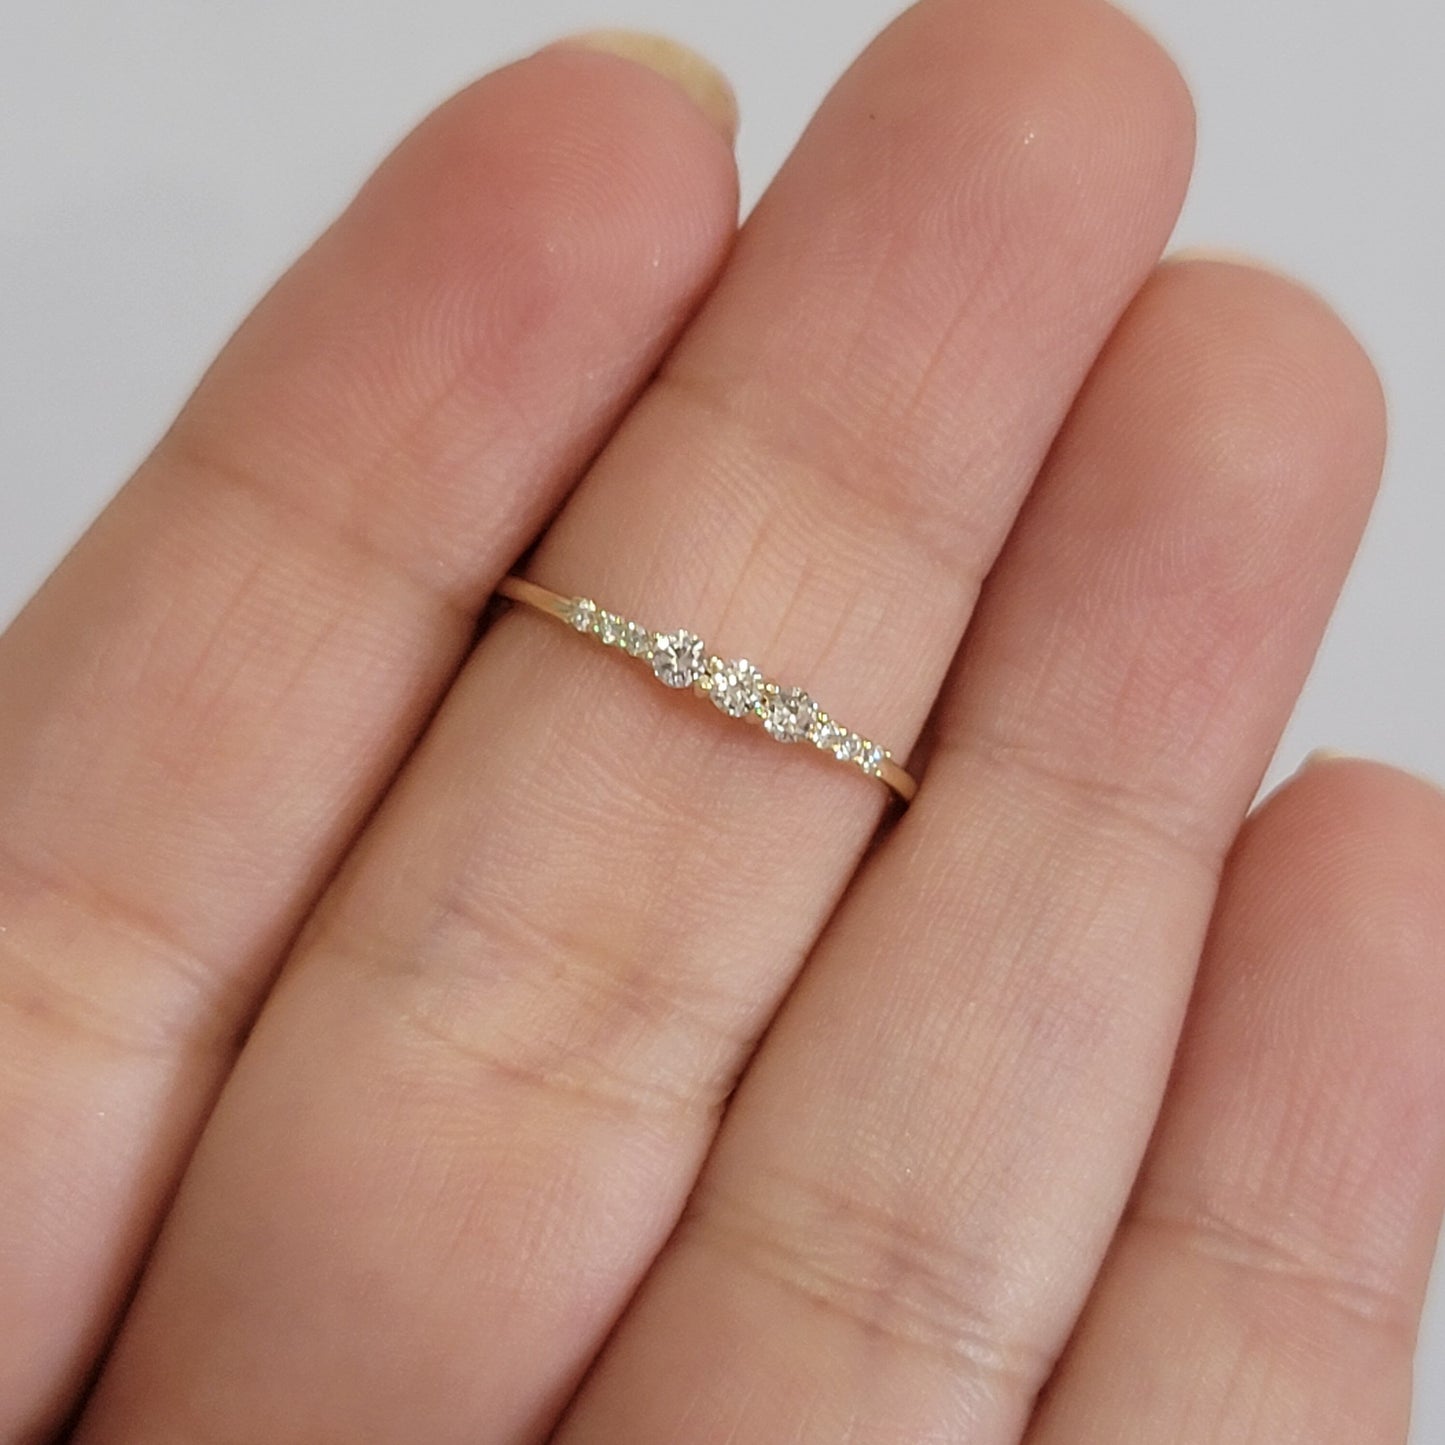 14K White Gold Diamond Ring, Solid Gold Band, Minimalist Engagement Ring, Dainty Ring, Diamond Stacking Ring, 14K Rose, Gift For Her